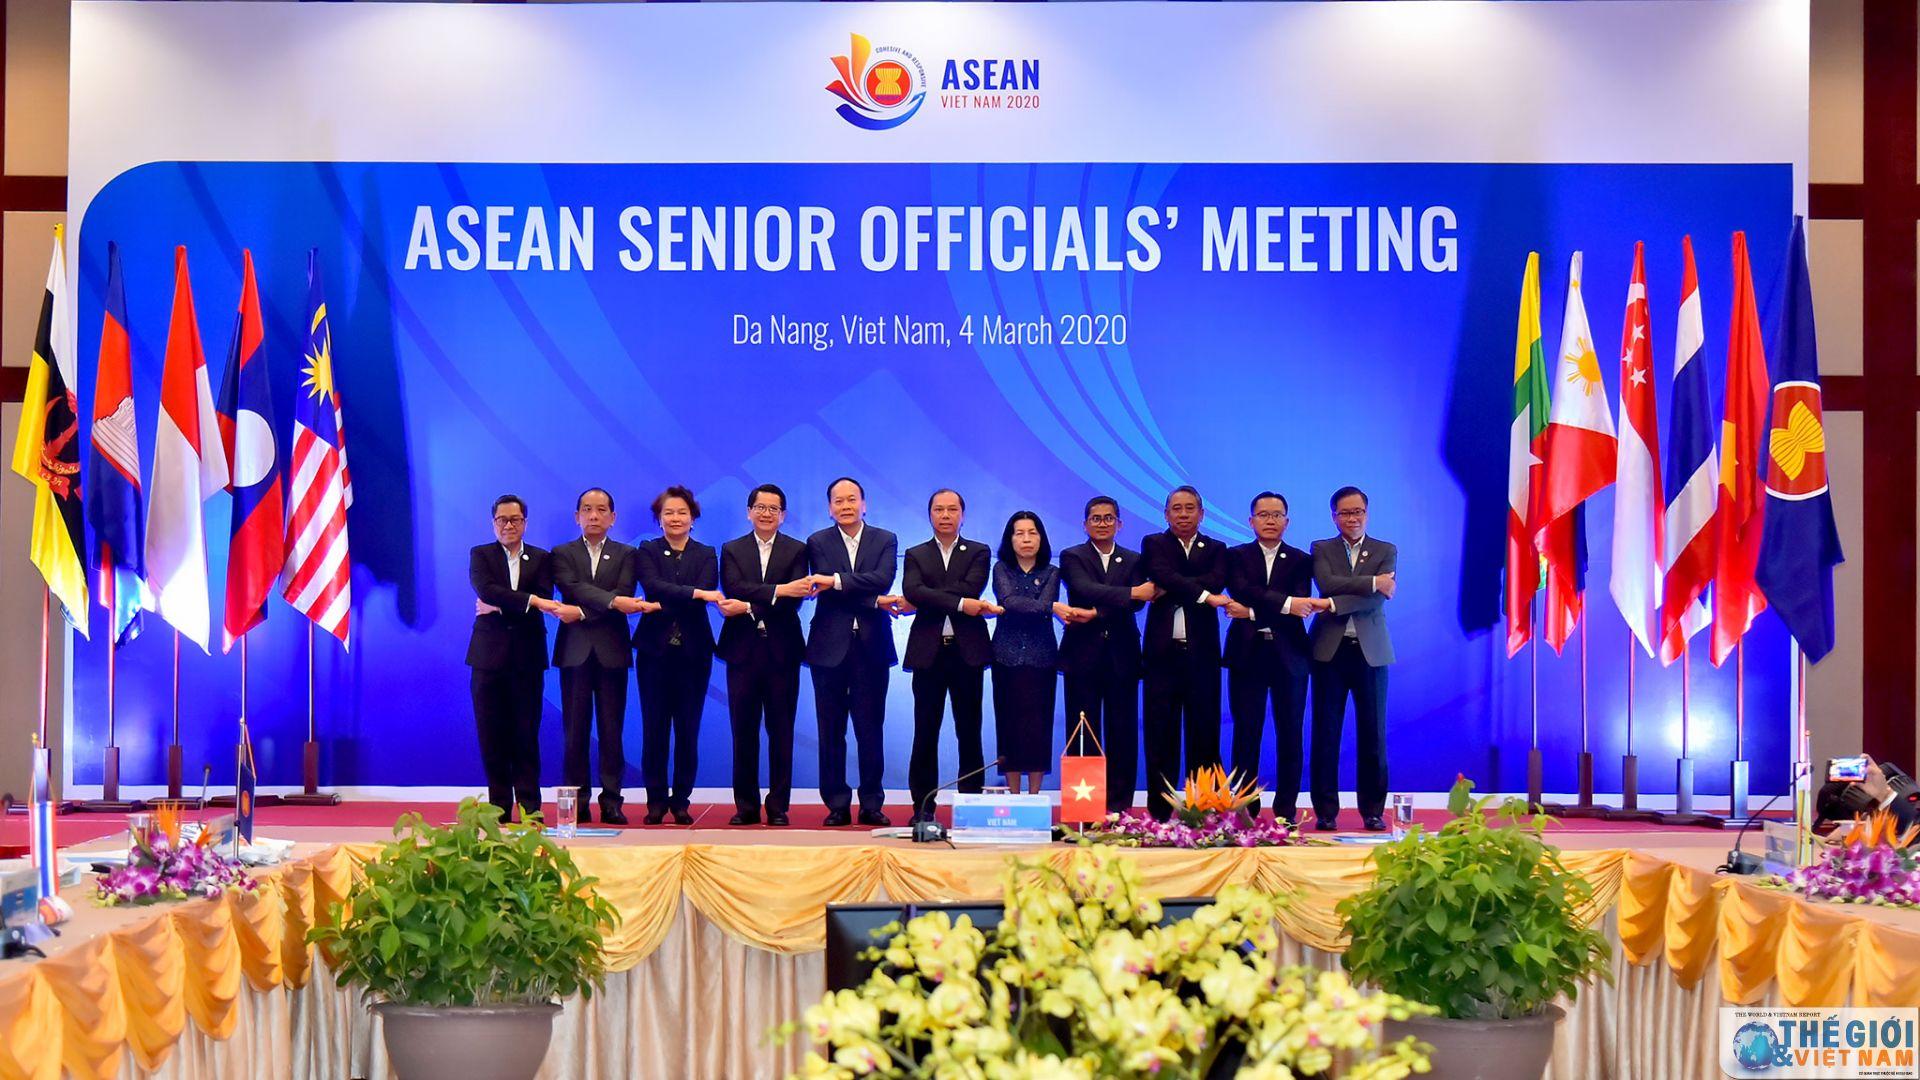 building post 2025 asean vision under discussion in da nang